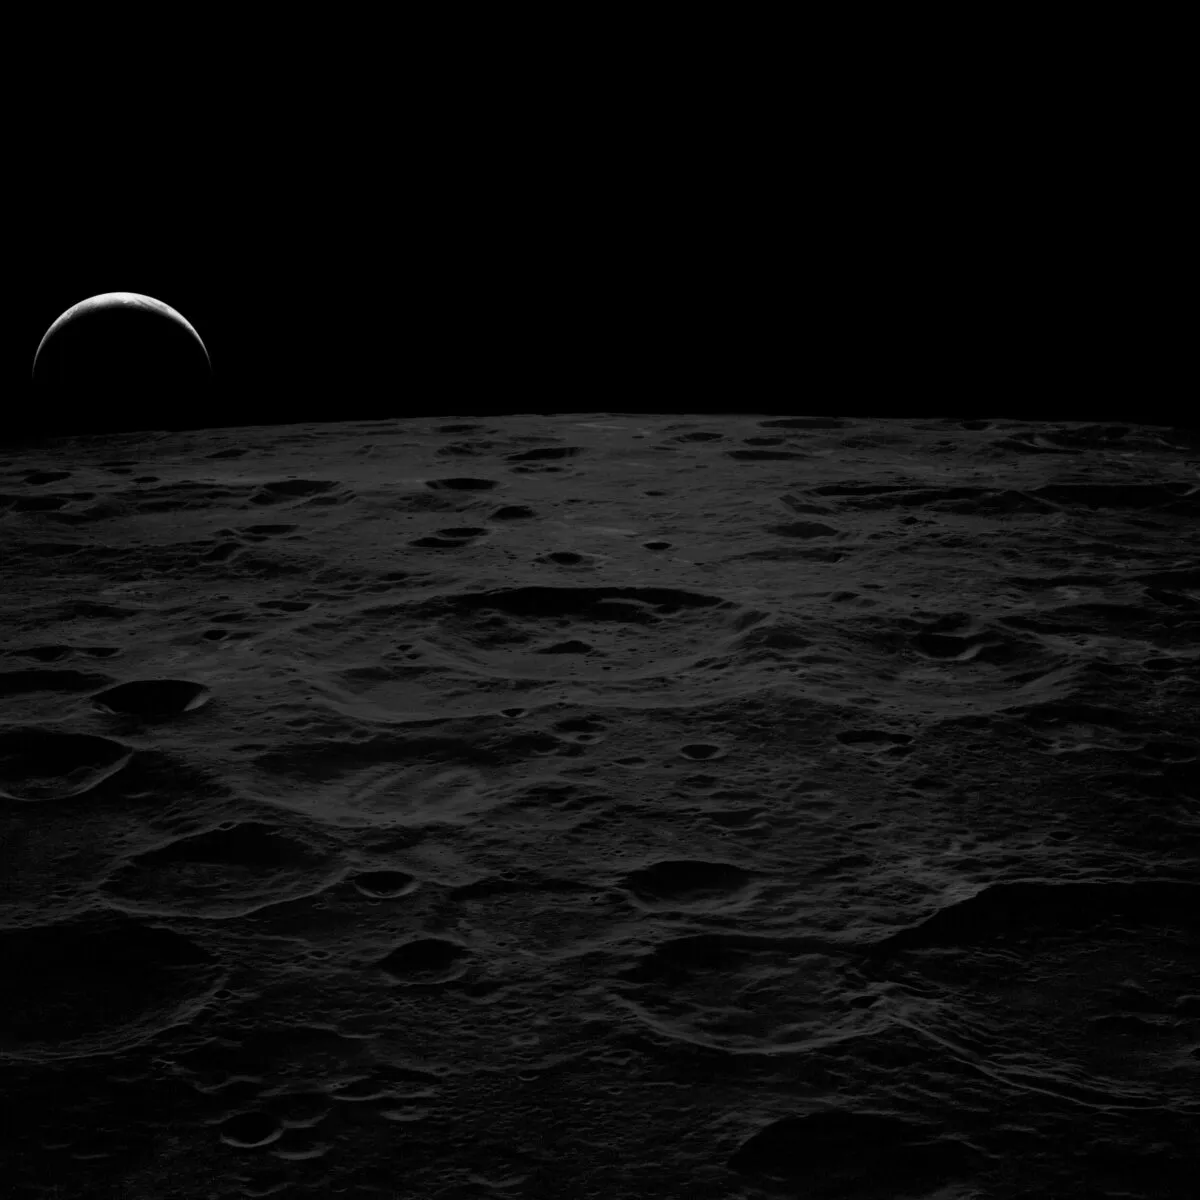 A black and white earthrise captured during Apollo 14, 7 February 1971. When this image was taken, the astronauts were returning from the far side of the Moon on their journey home. Credit: NASA / restored by Toby Ord